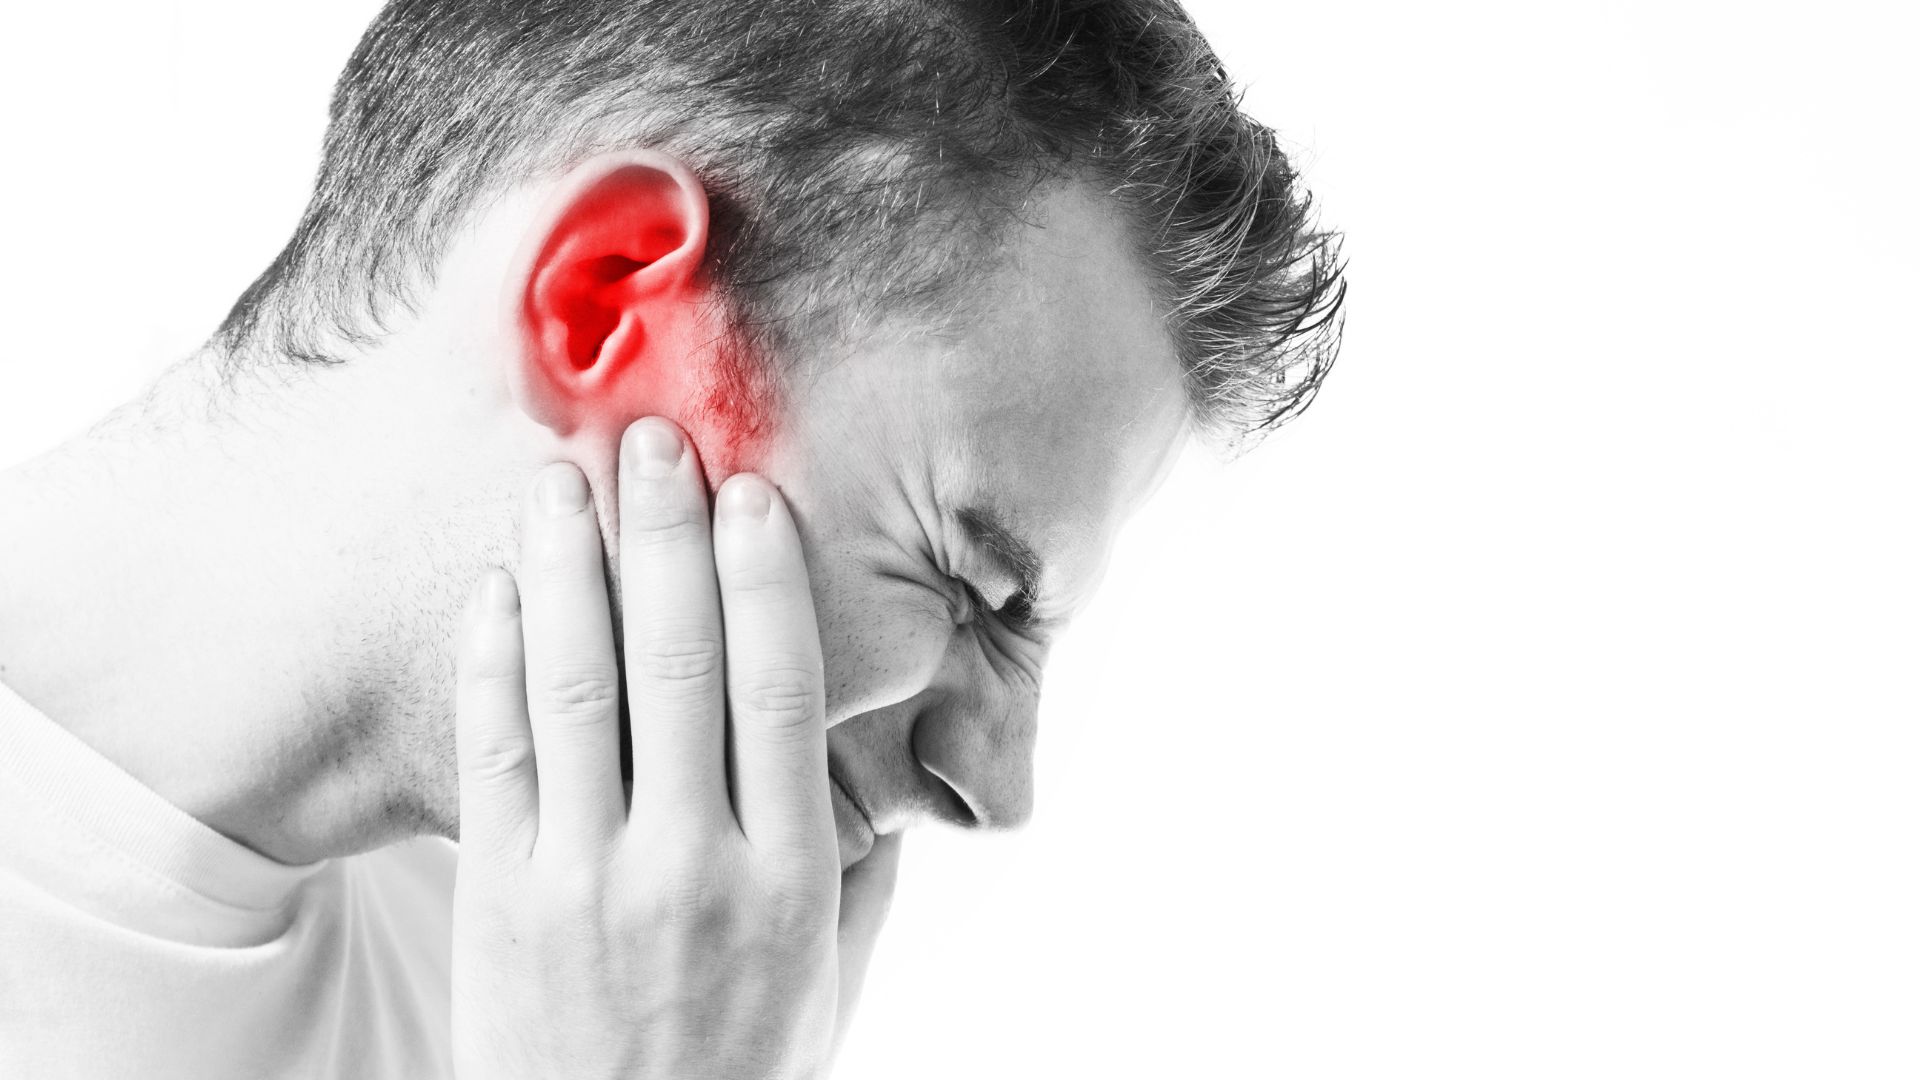  Buzzing in the ear from tinnitus